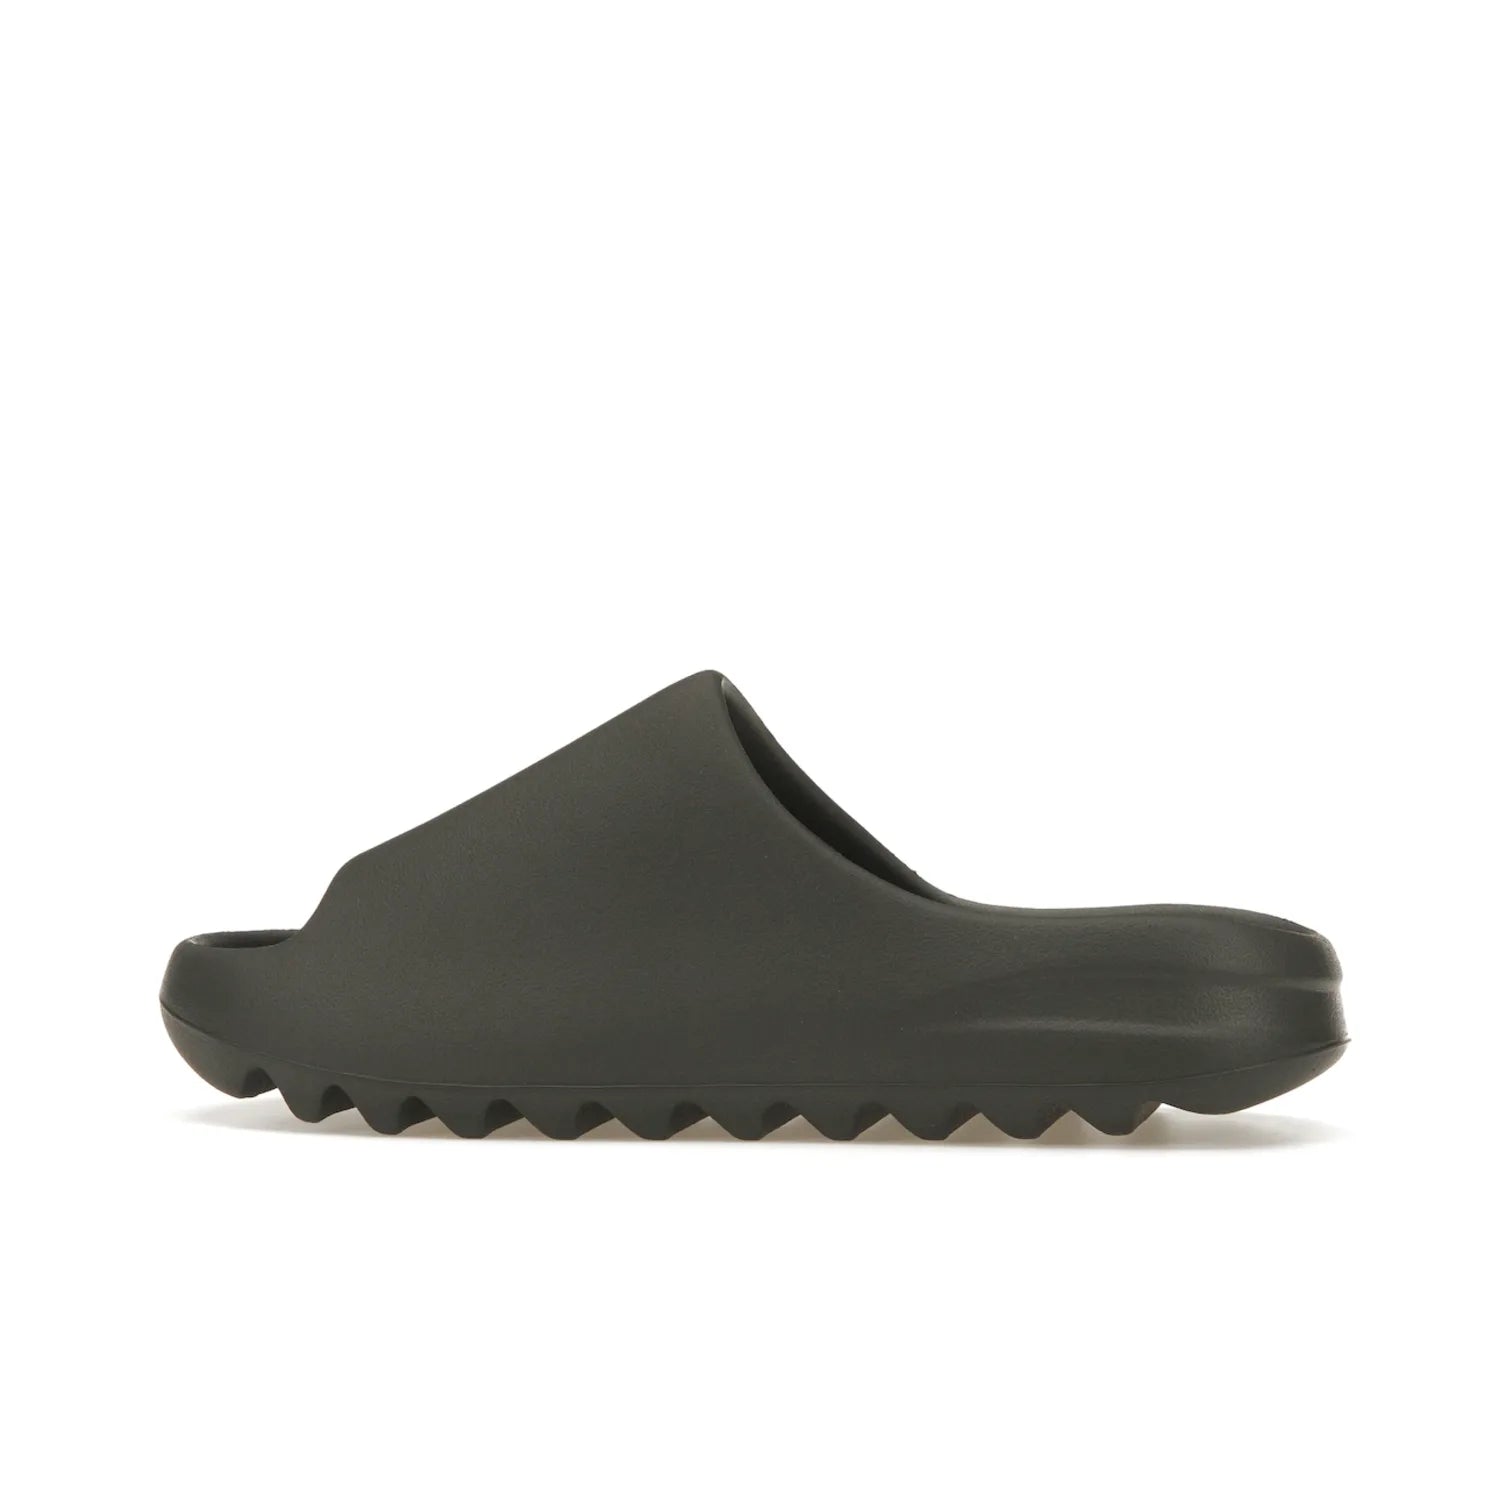 adidas Yeezy Slide Granite - Image 20 - Only at www.BallersClubKickz.com - Introducing the adidas Yeezy Slide Granite with a sleek, soft-to-touch one-piece upper – perfect for making a statement with its minimalistic design and luxurious comfort. Get yours now for only $70.